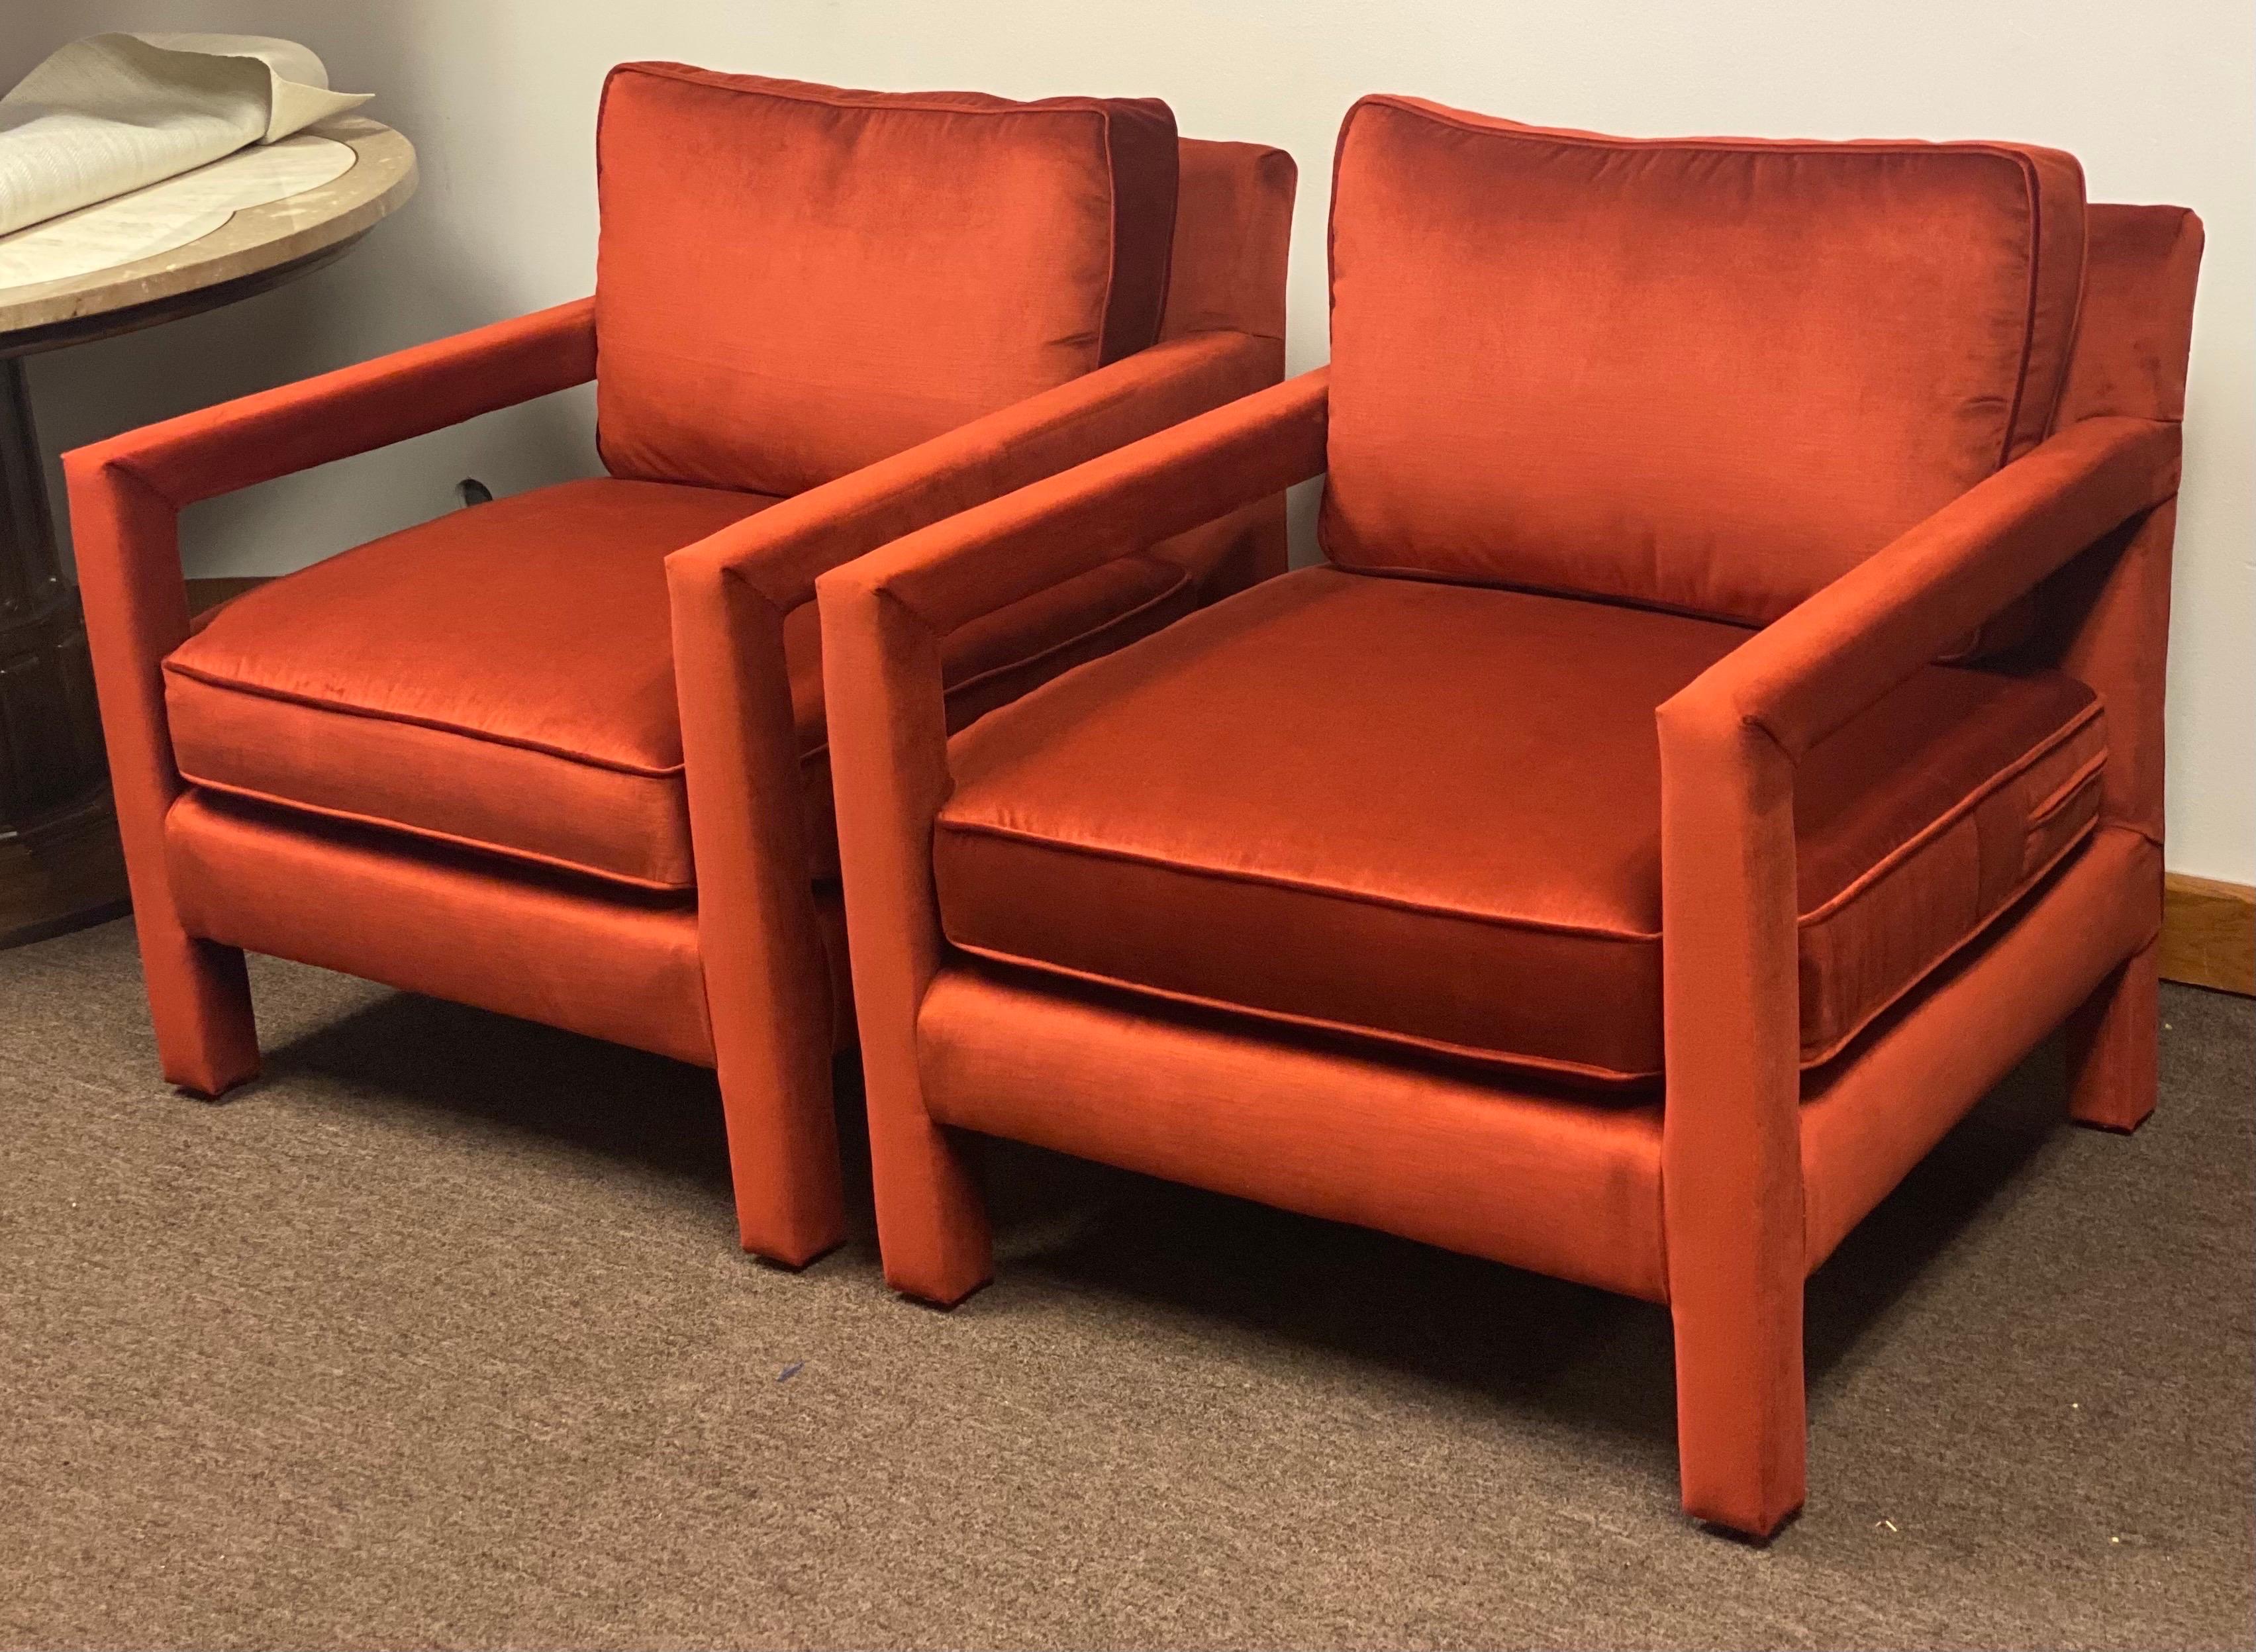 We are very pleased to offer an iconic pair of Milo Baughman style chairs, circa the 1970s. The parson lounge pair is a stylish modern armchair with a wraparound upholstered frame and a comfortable feel. This fabulous set is newly reupholstered in a